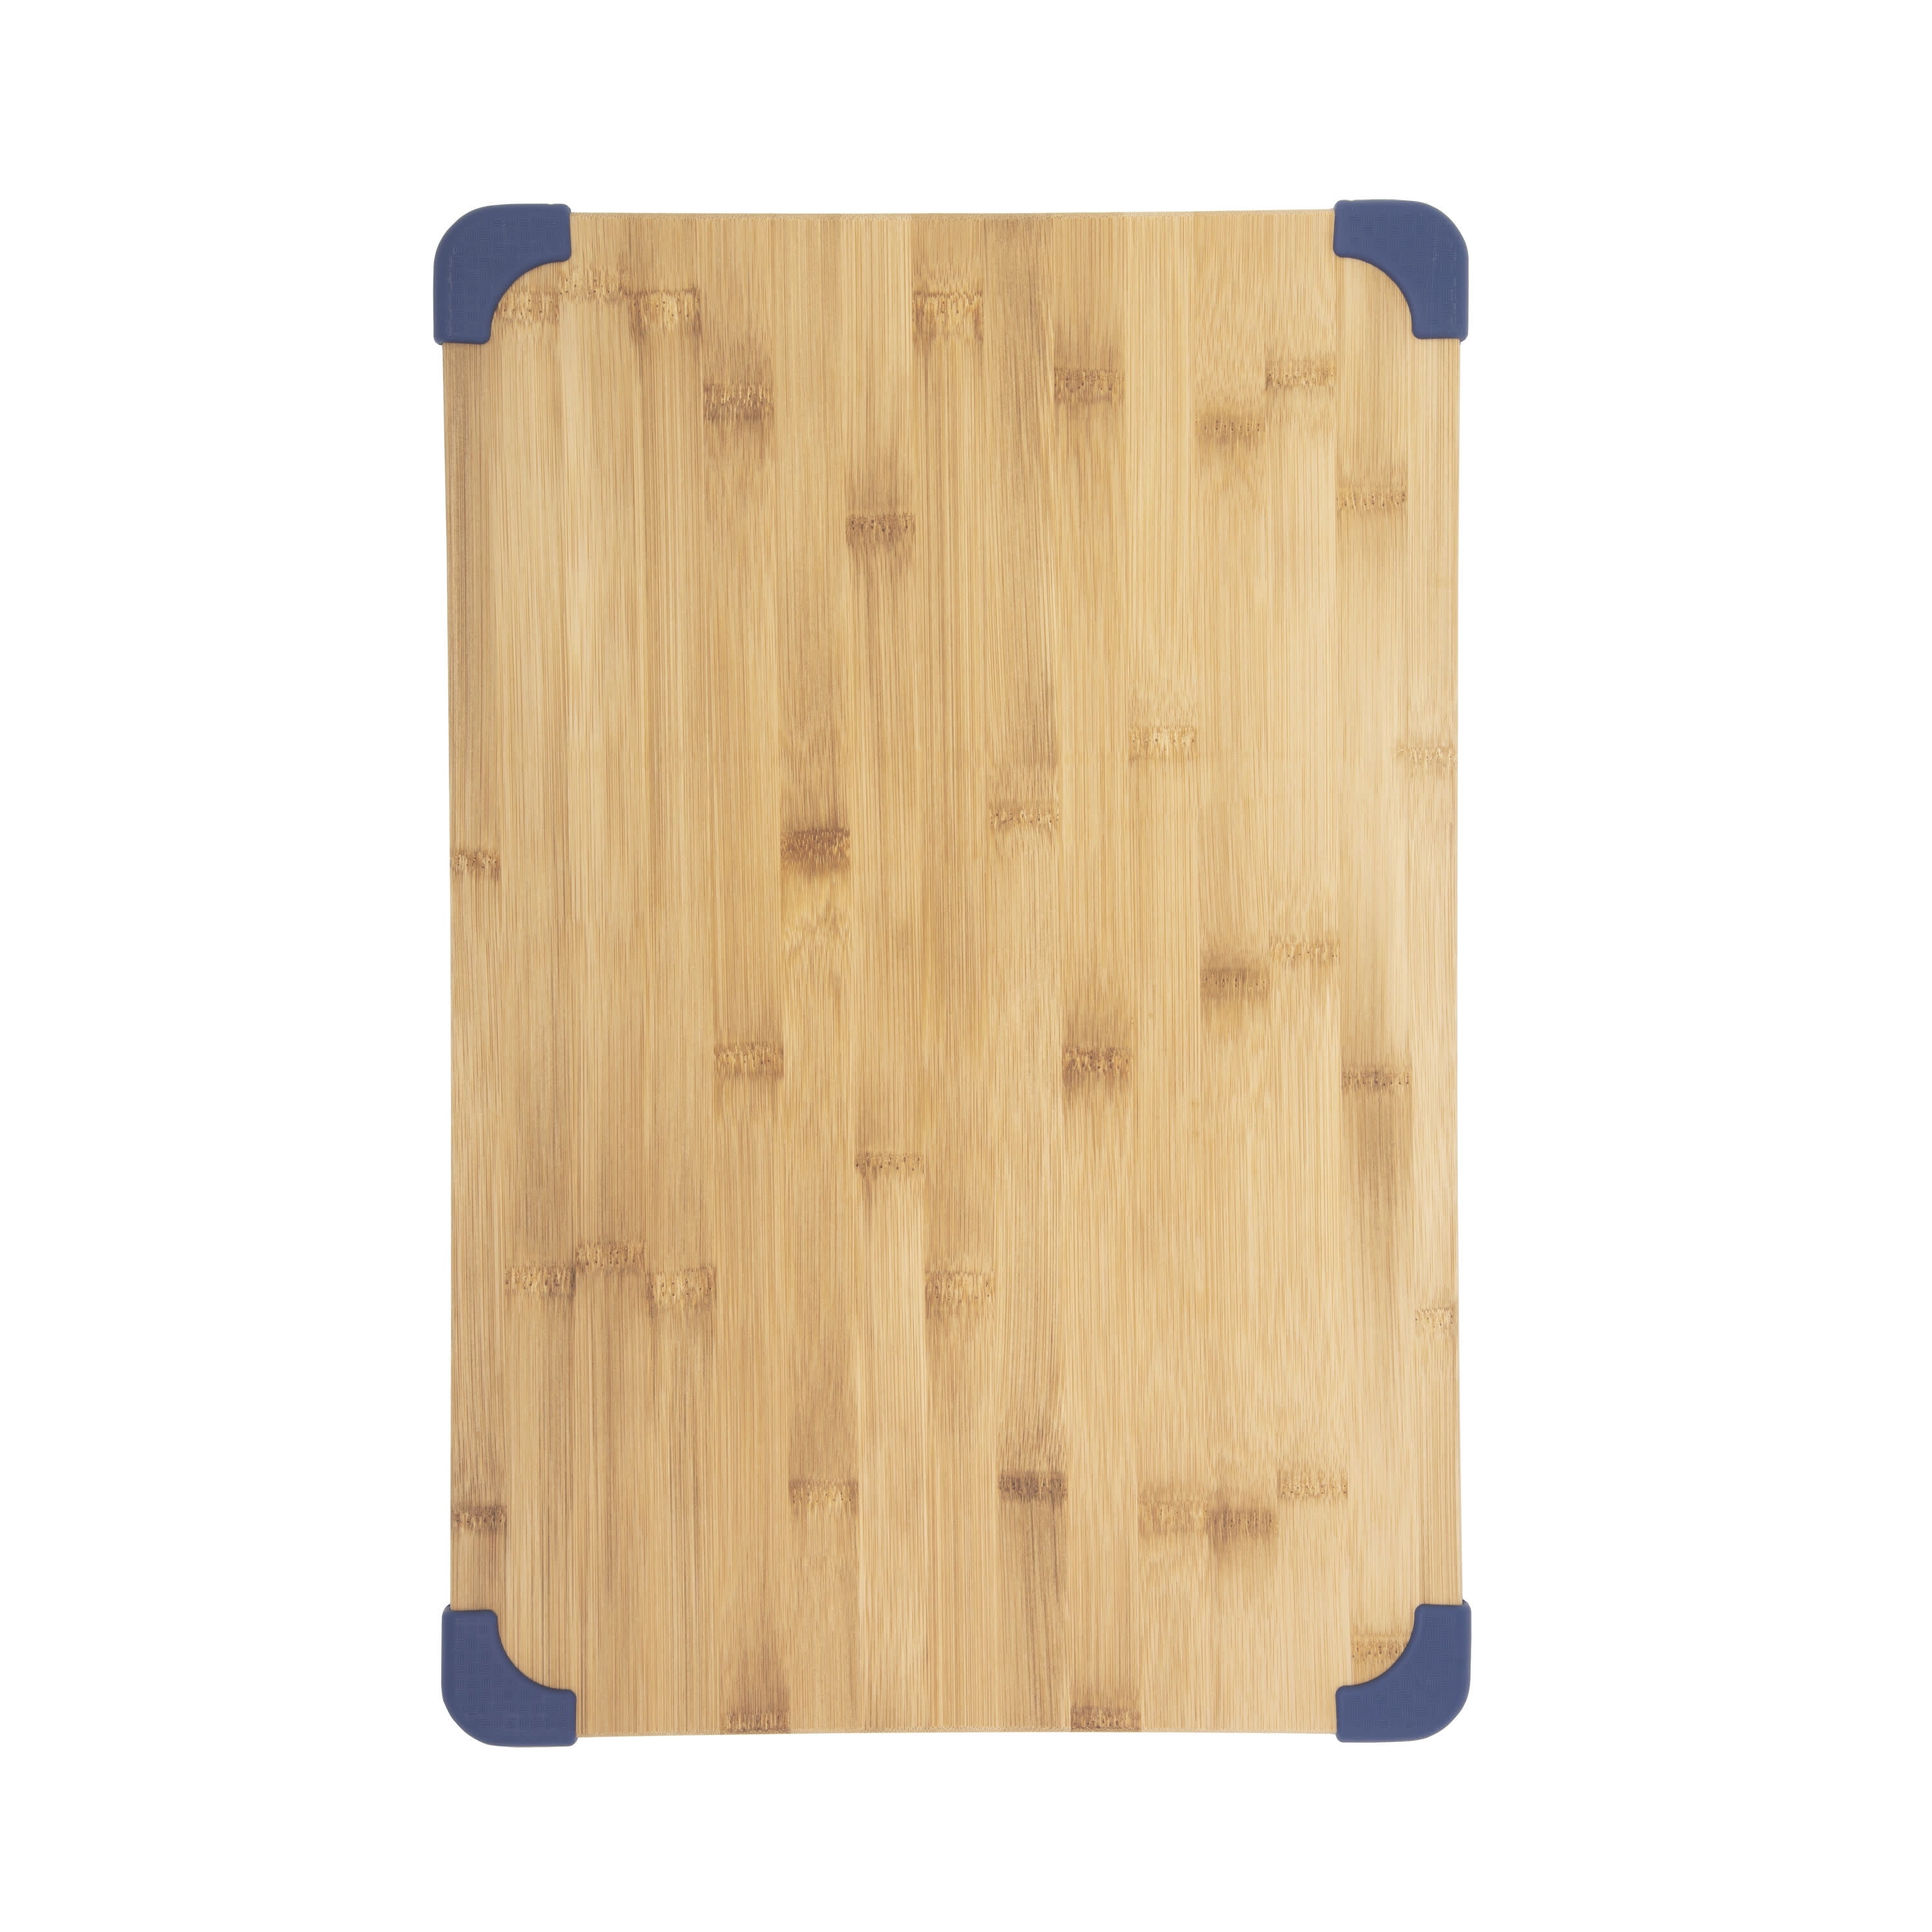  Lipper International Bamboo Wood Thin Cutting Board with Oval  Hole in Corner, Assorted Sizes, Set of 3: Home & Kitchen